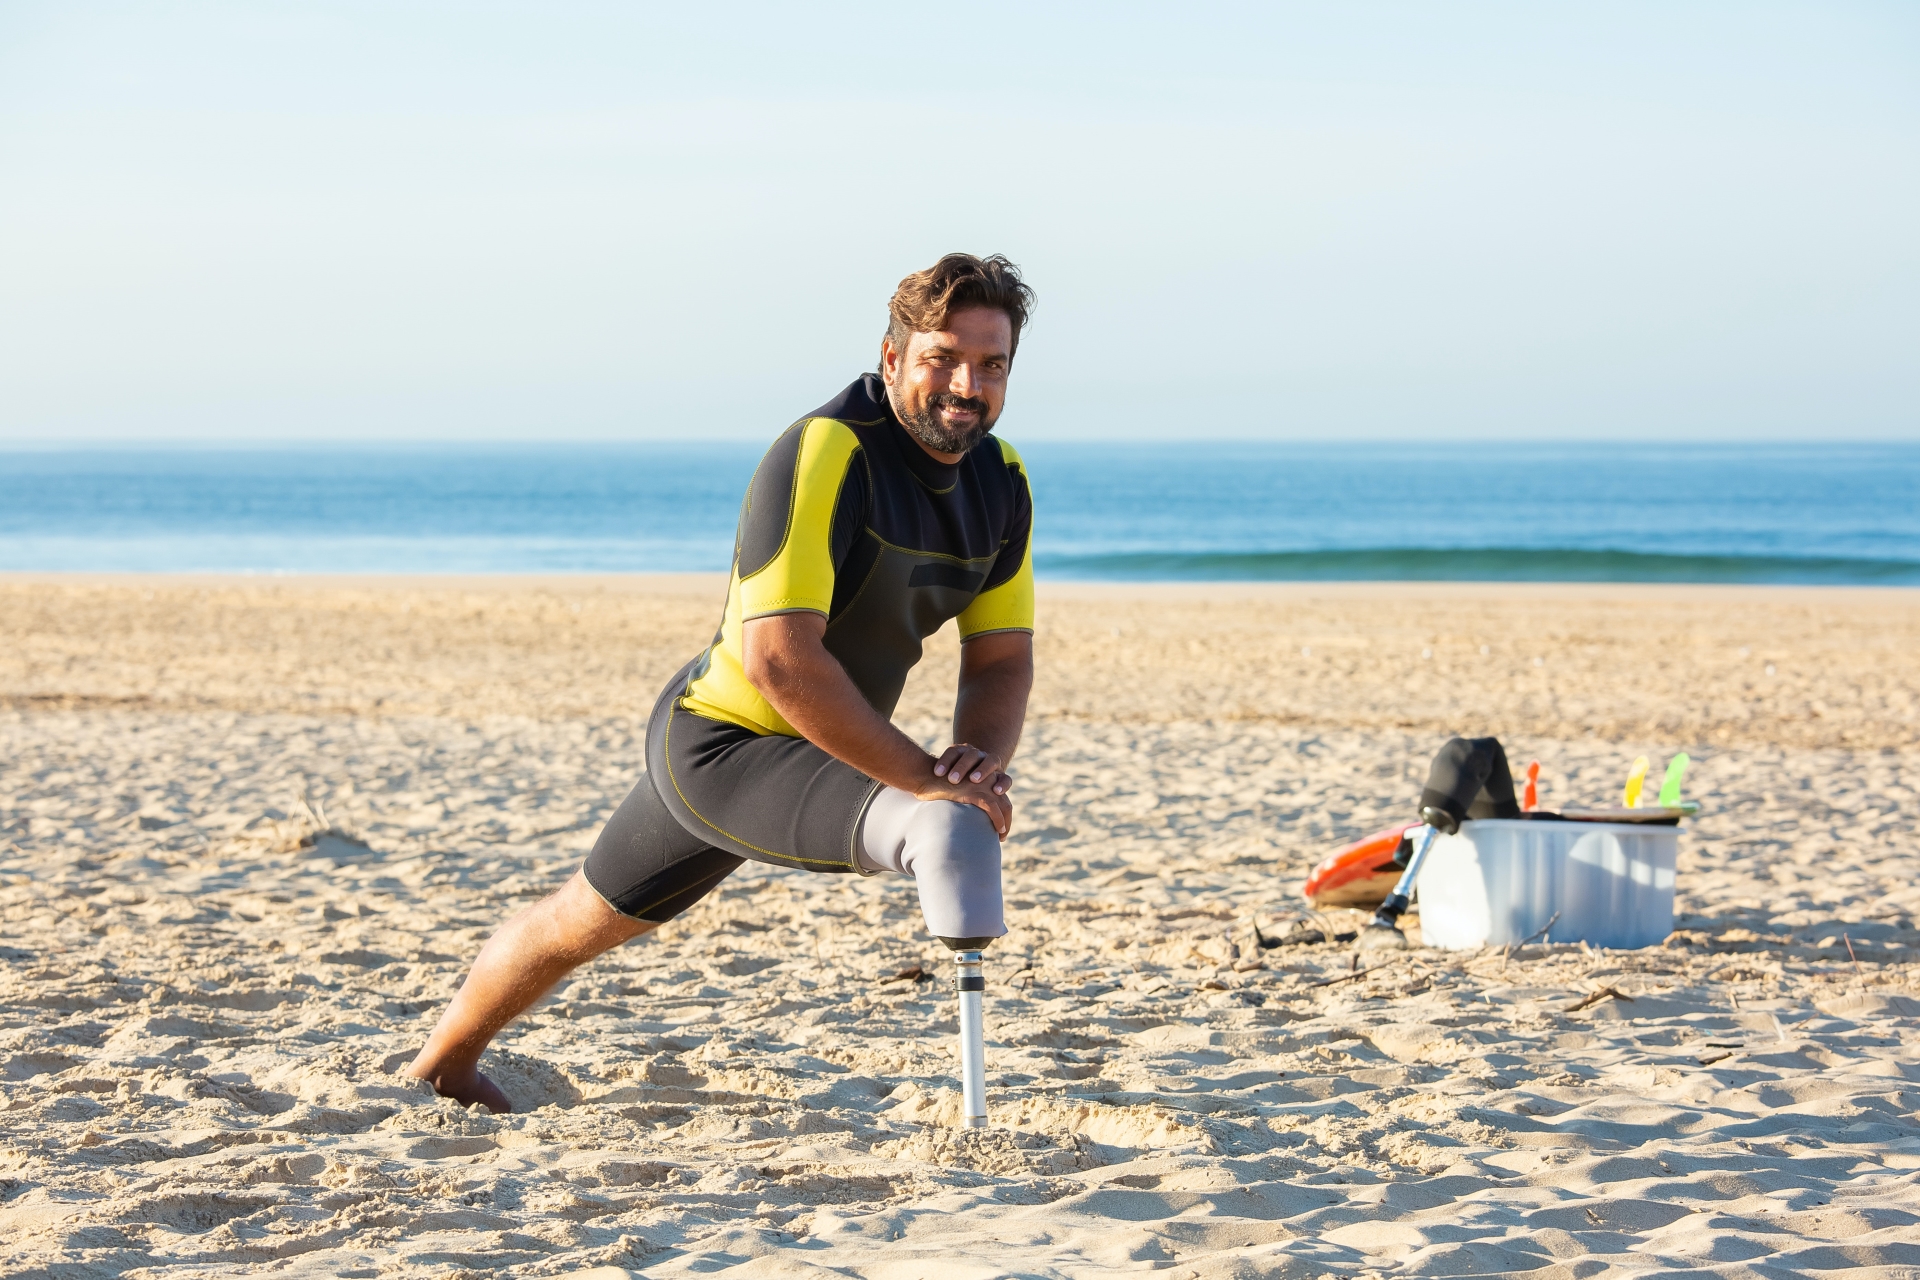 A man with one leg does a lunge using his prosthetic leg on the beach